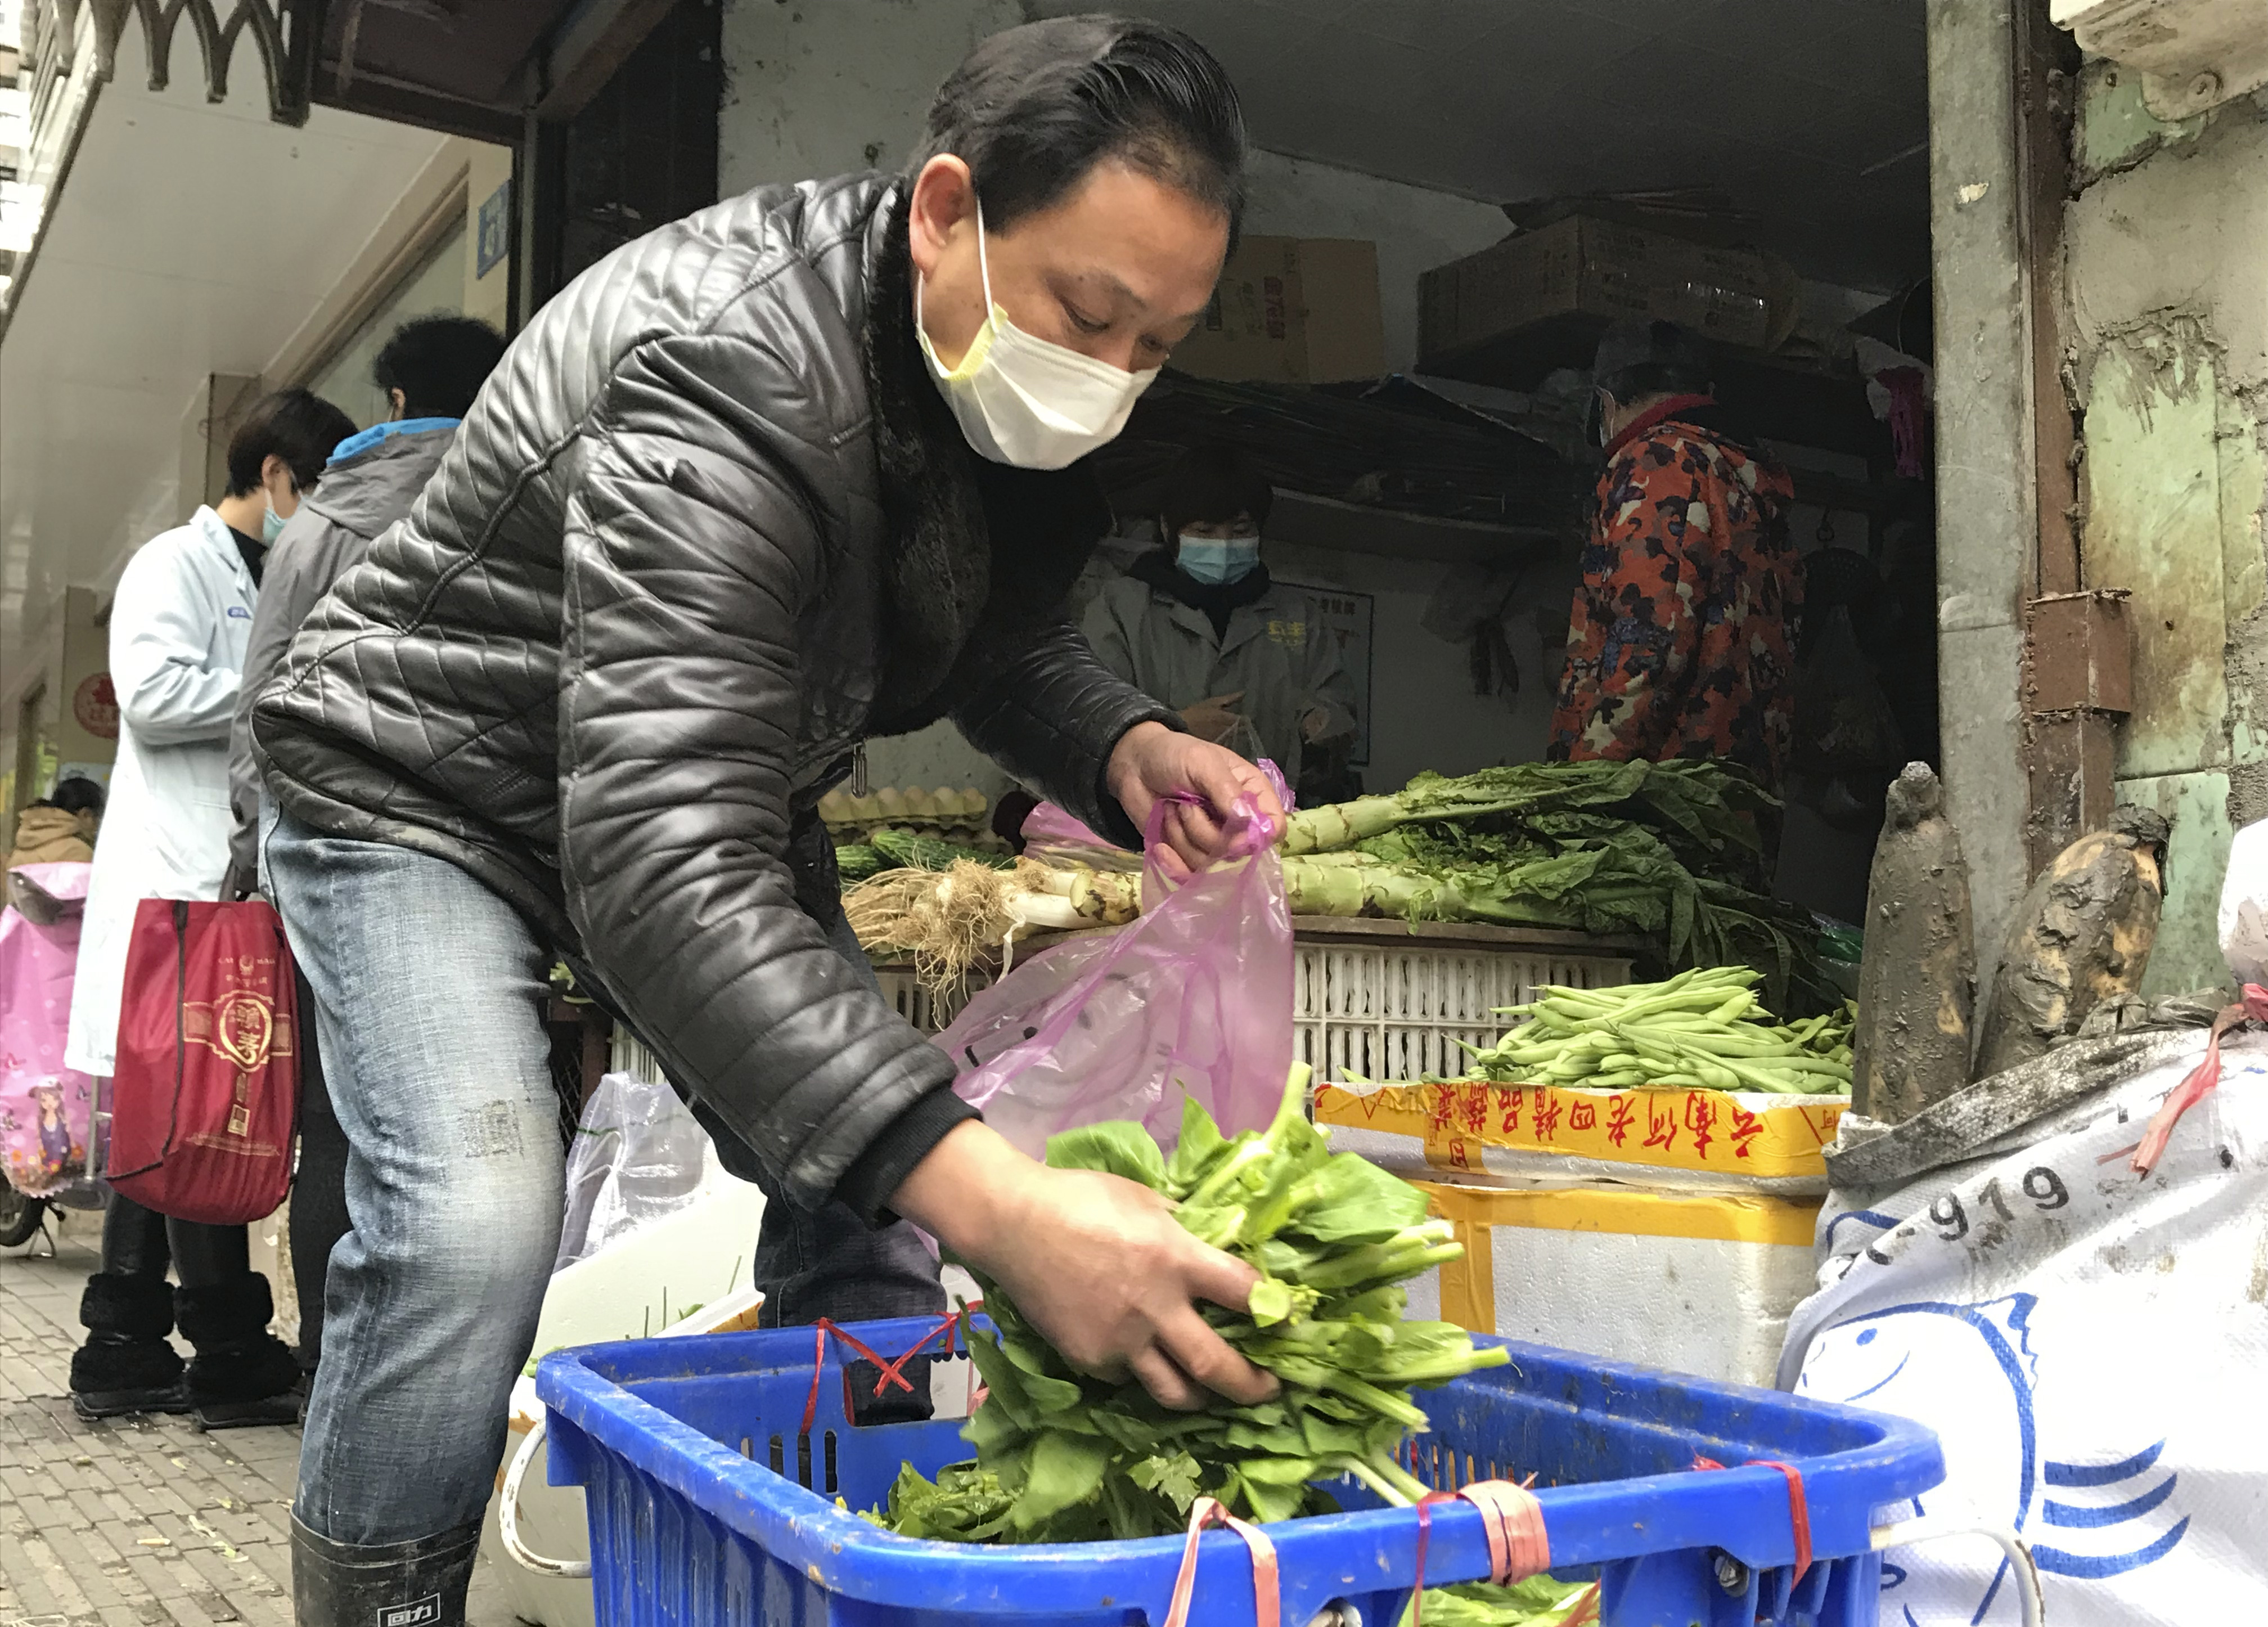 A vegetable vendor grabs some produce at a store in Wuhan in central China's Hubei province